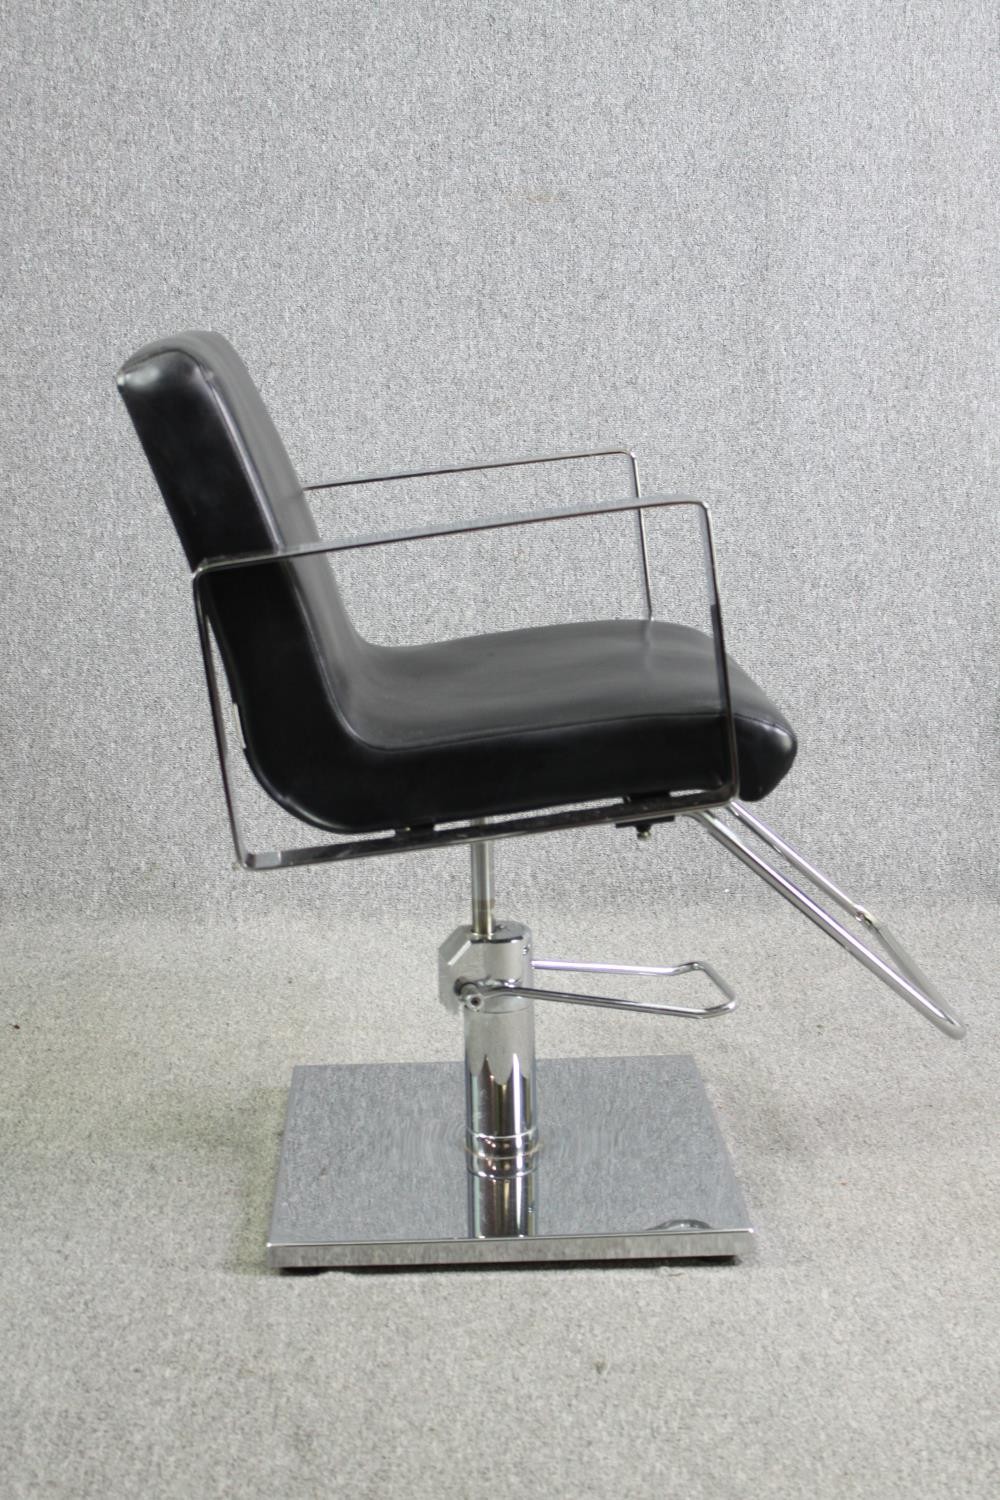 A pair of adjustable chrome barber's chairs in faux leather upholstery. - Image 4 of 6